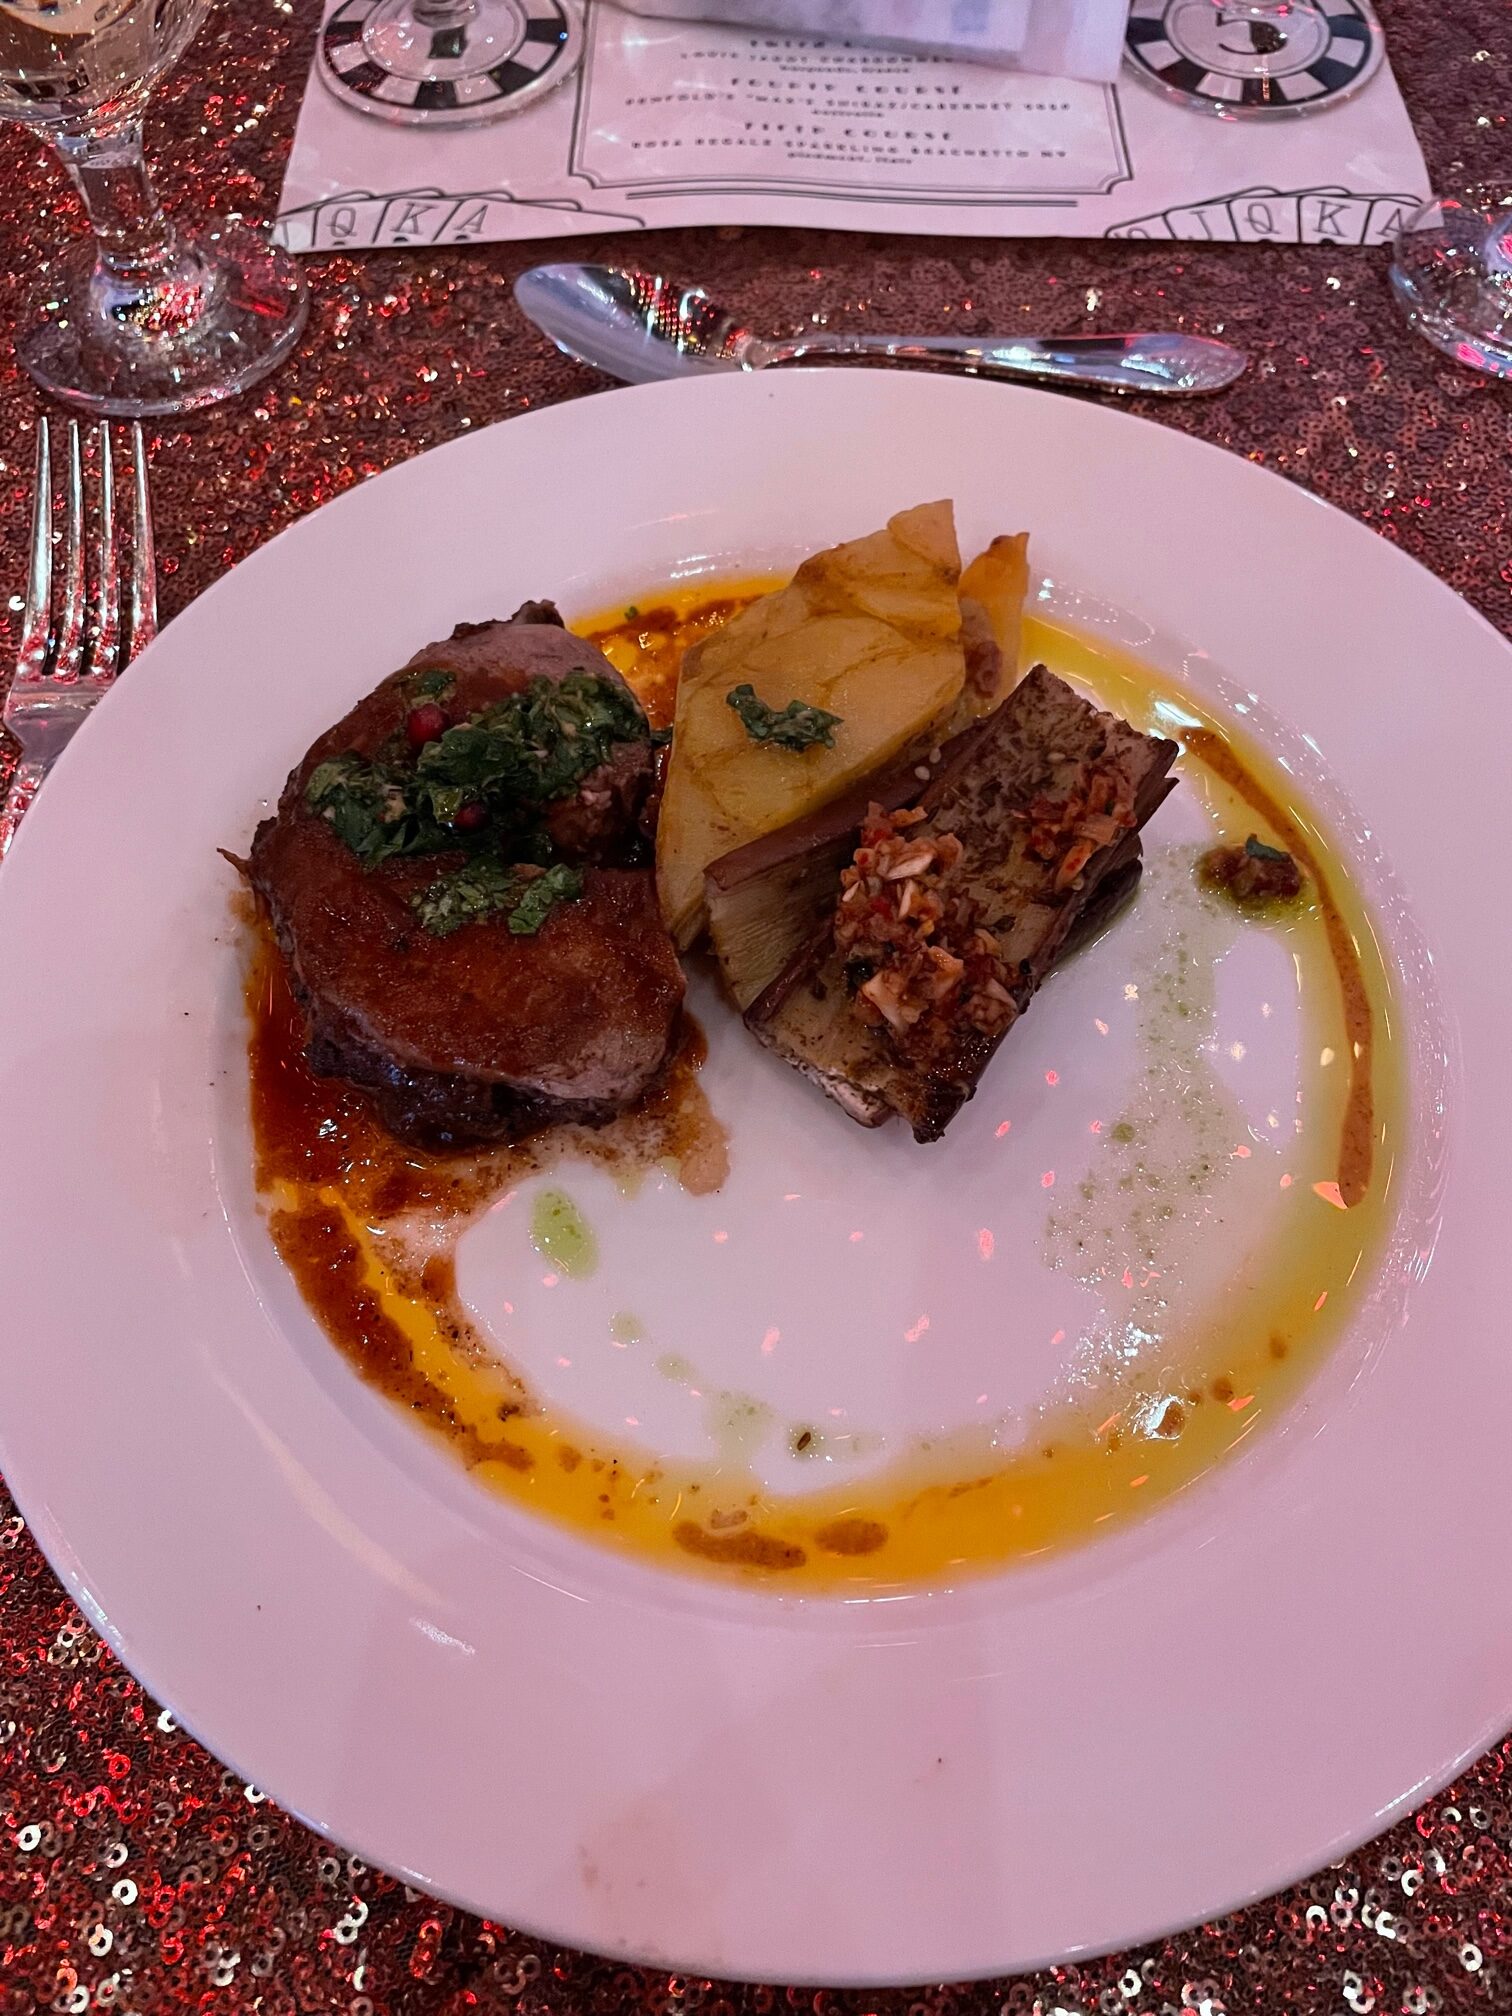 Fourth course of the grand gala dinner. 